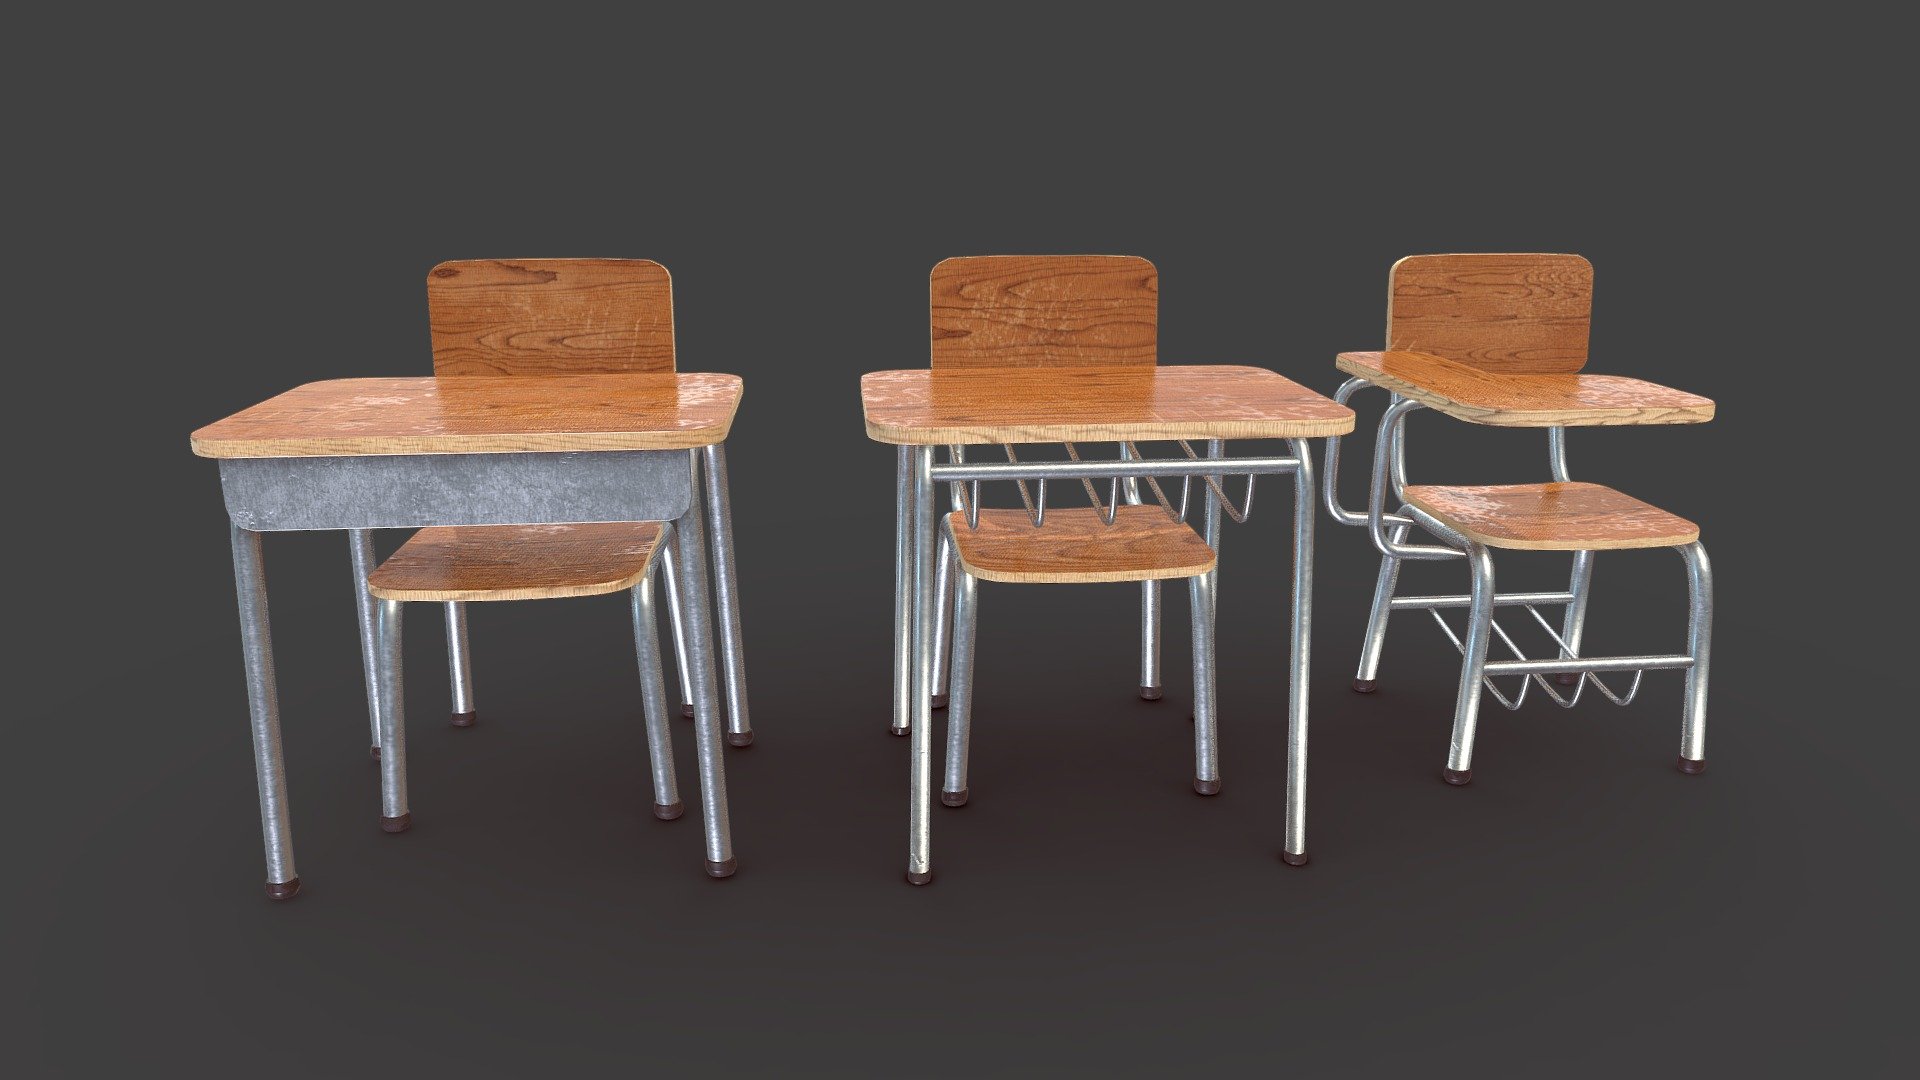 Rar content (17MB):


Table type 1, 2, 3
+1 Doble Table included

Texture Maps (2048x2048)
- Base Color, Metallic, Roughness, Normal

.FBX file (contains 4 of each desk)


If you need help with this model or have any questions, feel free to contact me. I will be happy to help you.

Contact:

Instagram: MurallaMuerta

Artstation: SebastianBA

Email: sebastian96ba@gmail.com - School Desk - Buy Royalty Free 3D model by Sebastian.BA 3d model